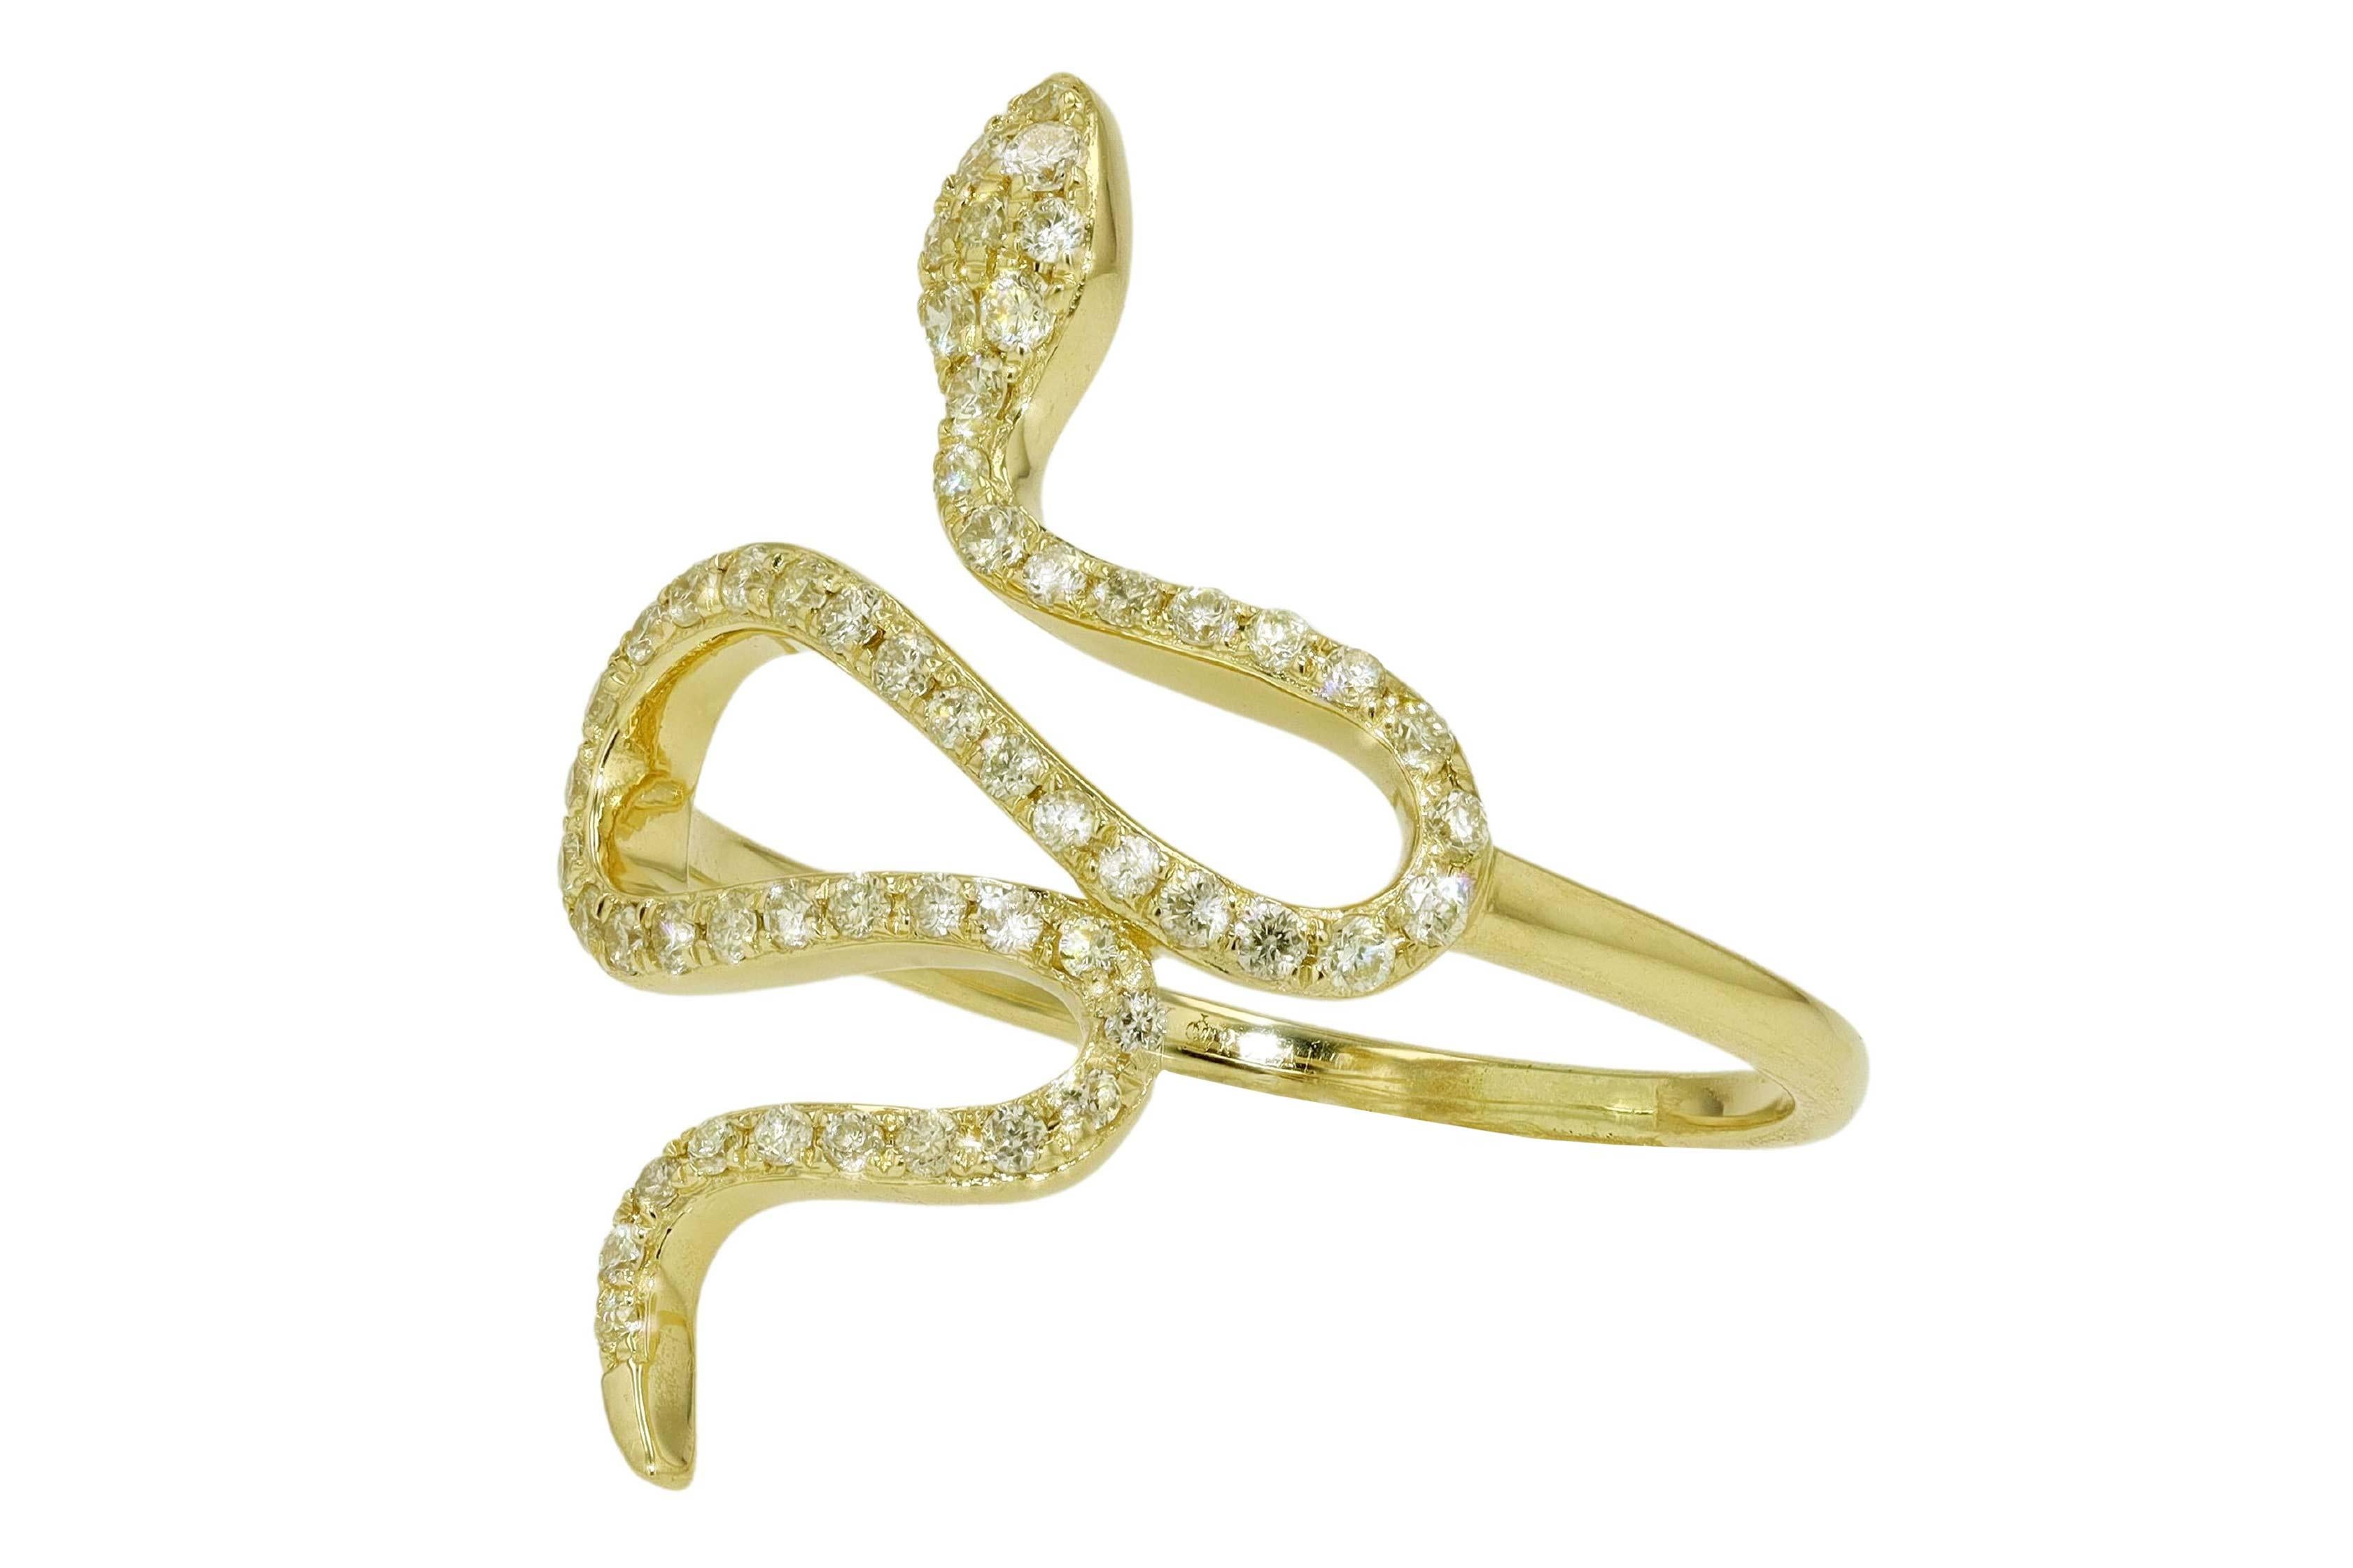 Women's Contemporary 14k Yellow Gold & Diamond Snake Ring For Sale